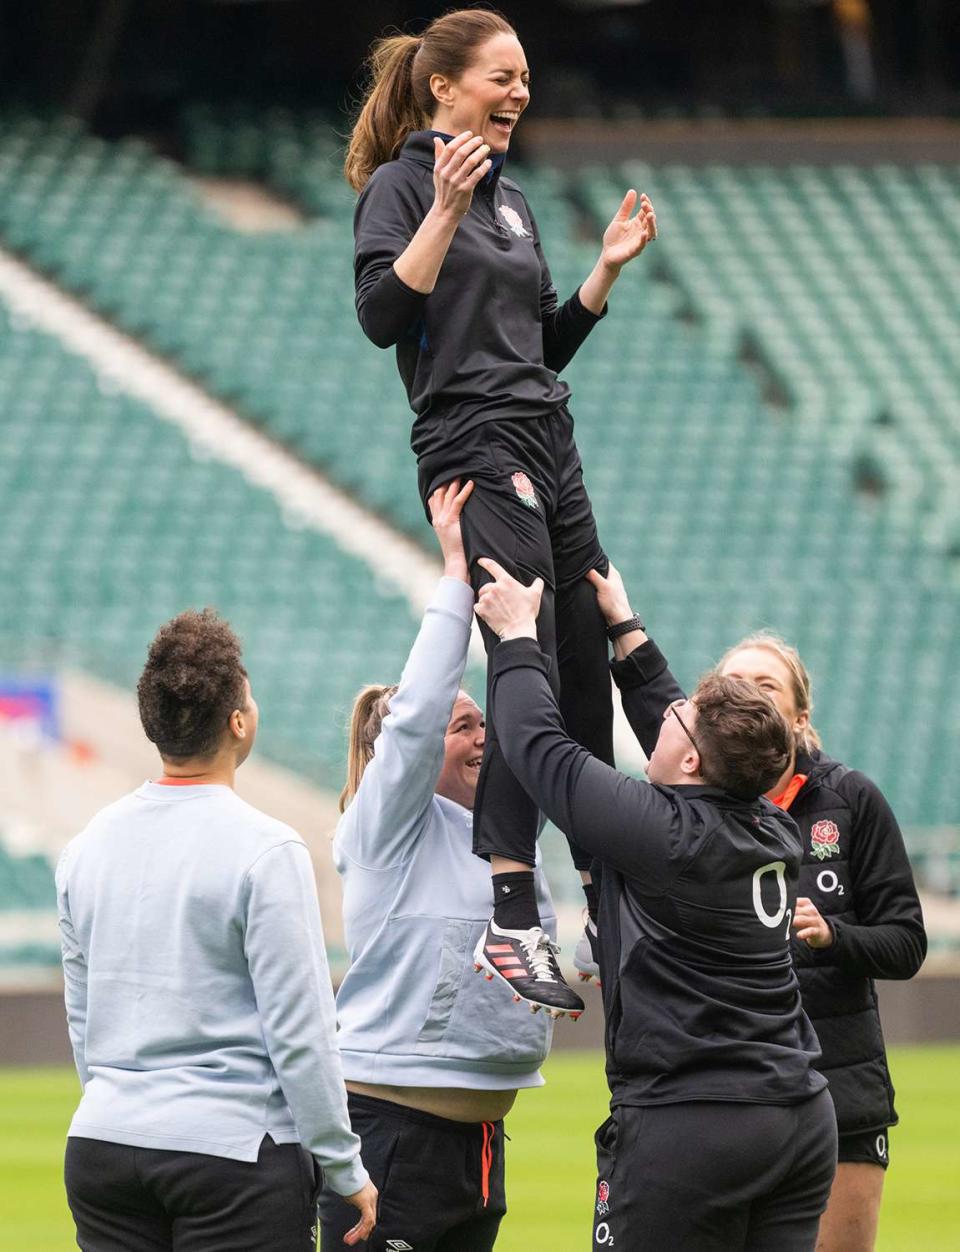 Kate Middleton rugby